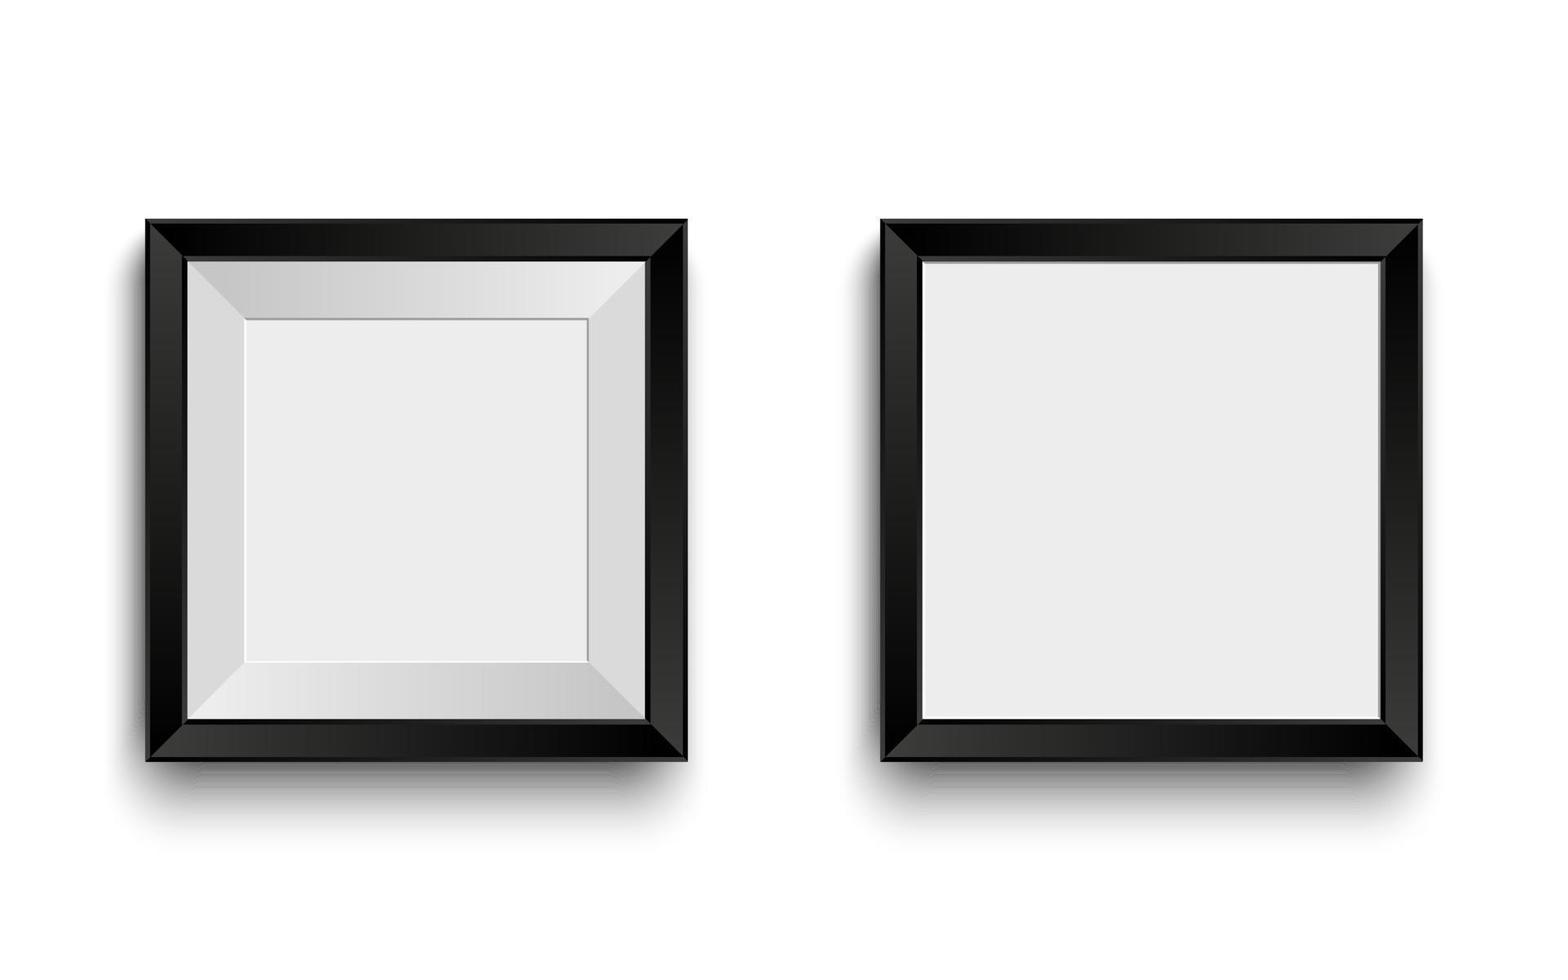 Realistic black frames for your picture or photo. Modern vector mockup template. Empty framing for your design